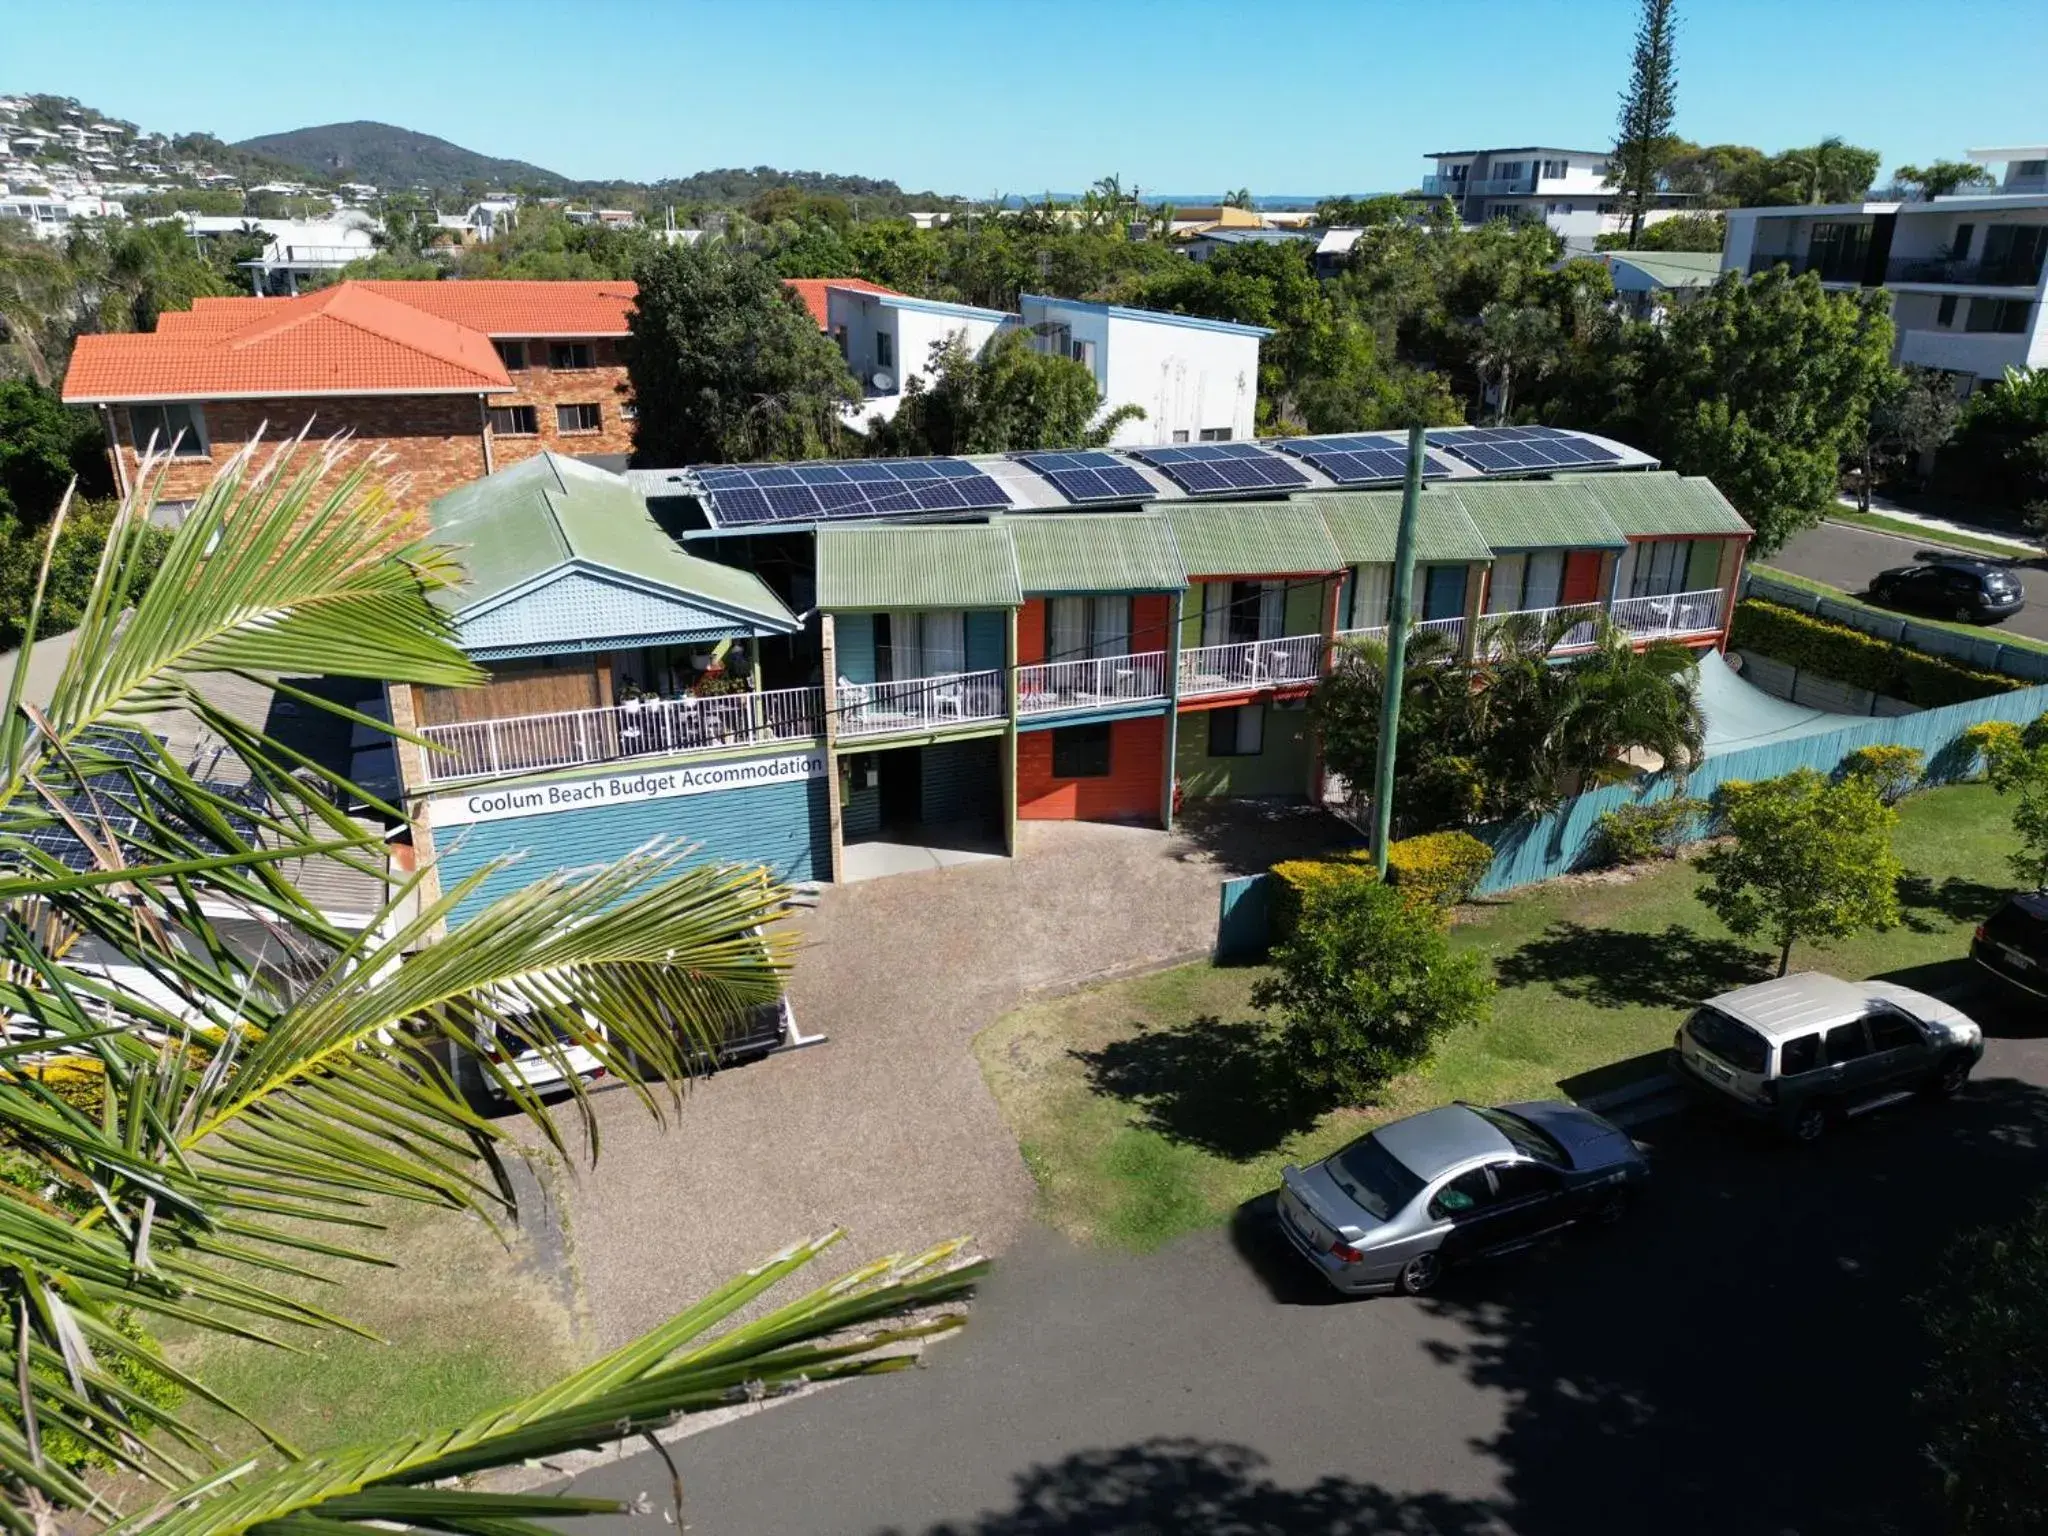 Property building, Bird's-eye View in Coolum Budget Accommodation